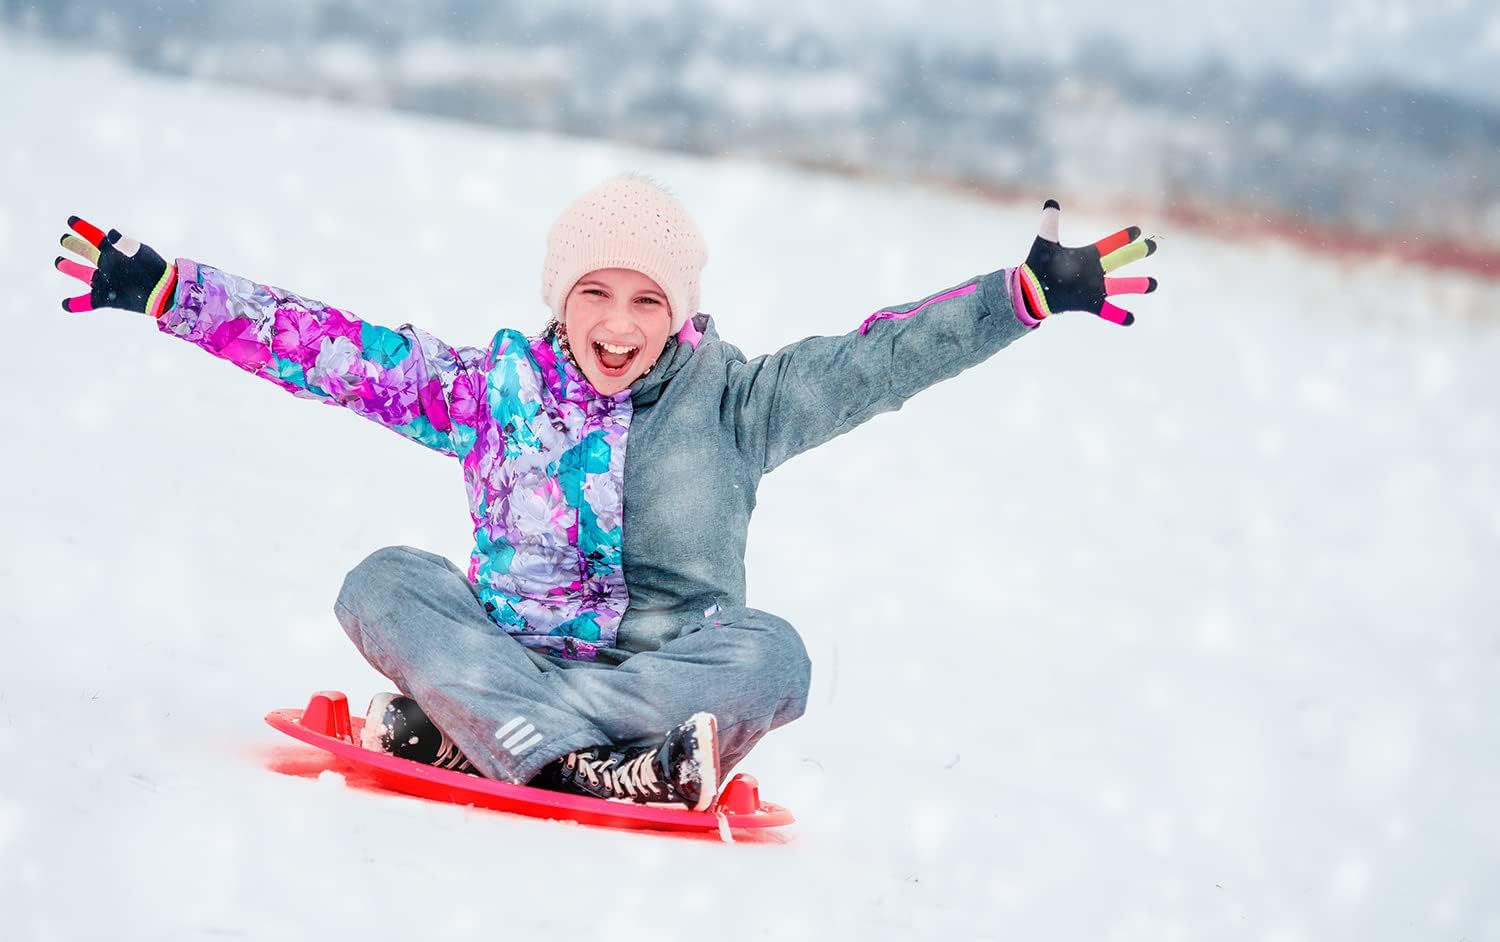 25" Downhill Saucer Snow Sleds | Durable Handles & Safe for All Ages, Color Options: Black, Red, Pink, or Ice Blue